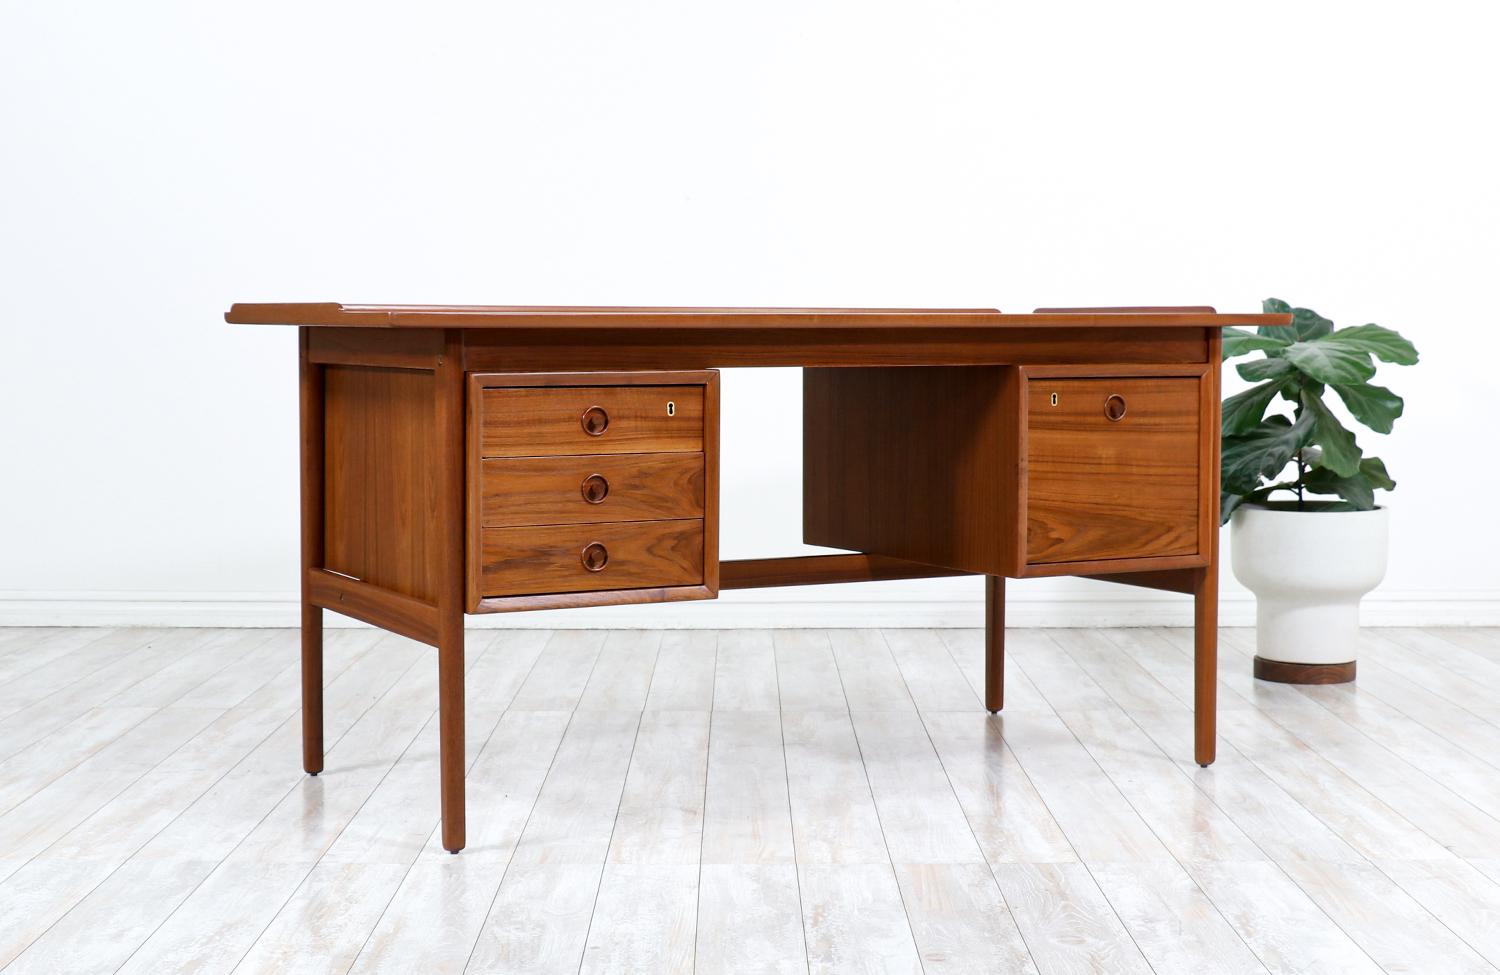 Danish modern executive teak desk with raises edges.

________________________________________

Transforming a piece of Mid-Century Modern furniture is like bringing history back to life, and we take this journey with passion and precision. With